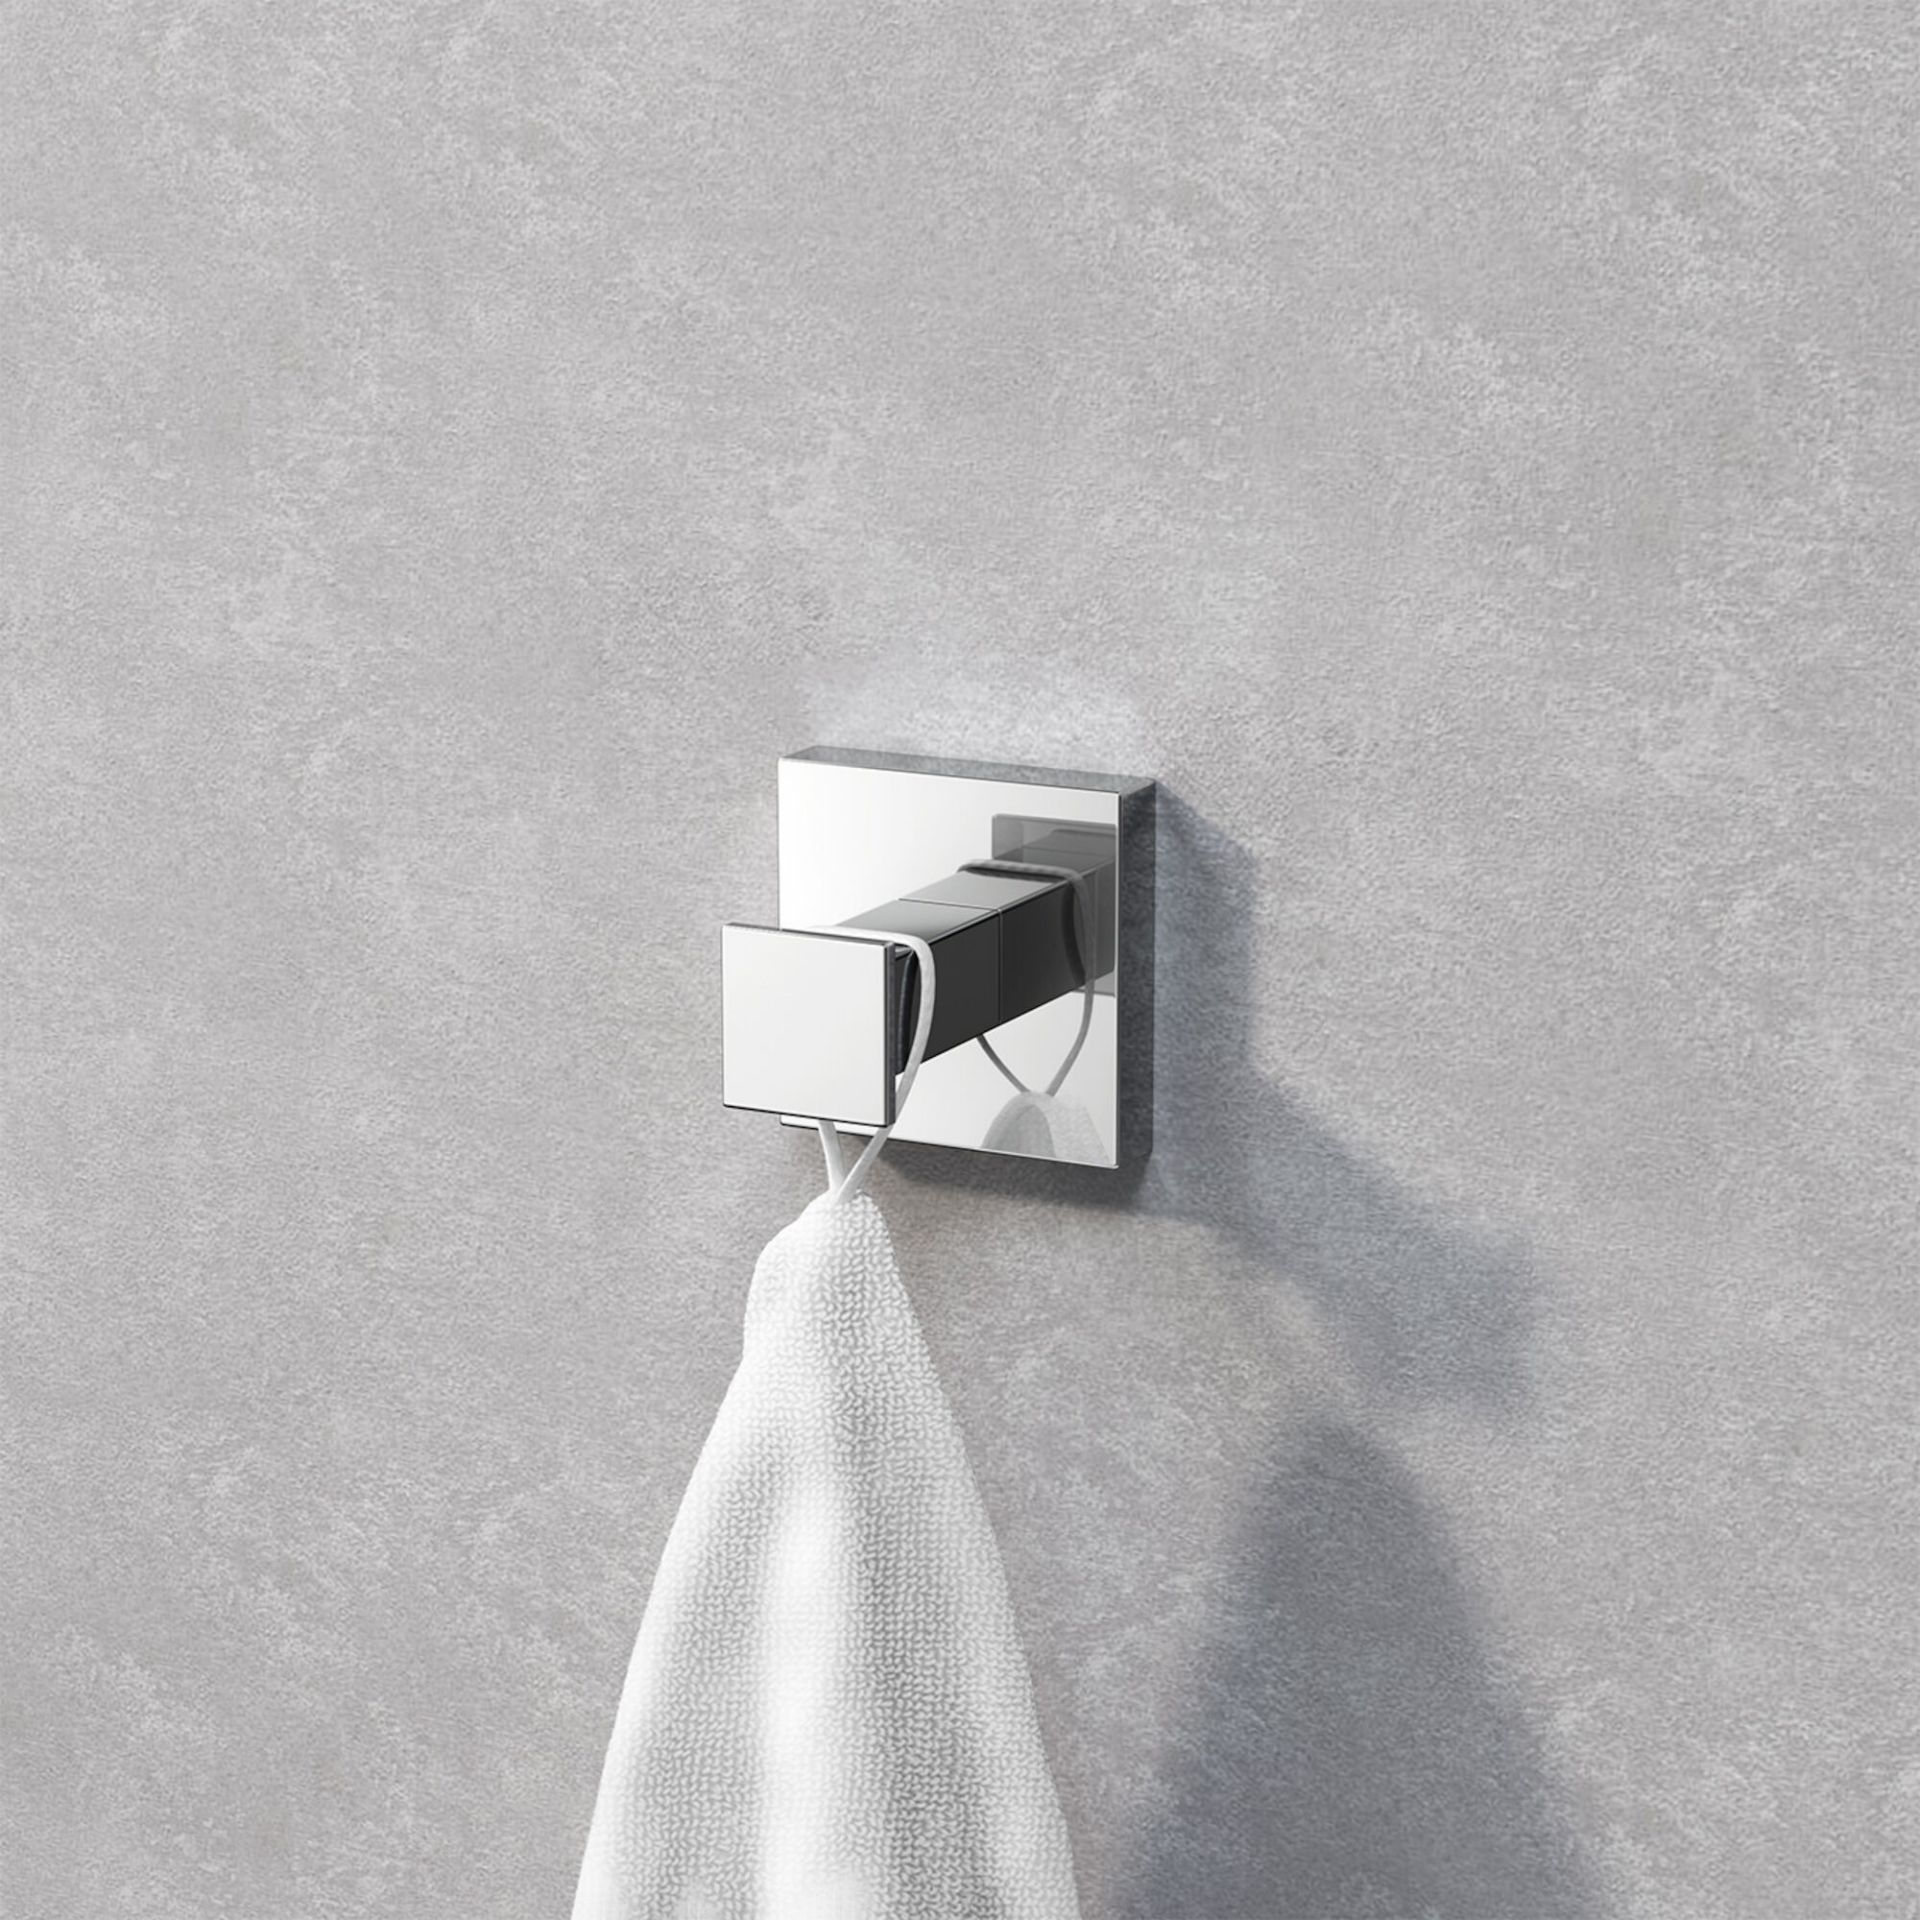 (PM1010) Jesmond Robe Hook Finishes your bathroom with a little extra functionality and style ...